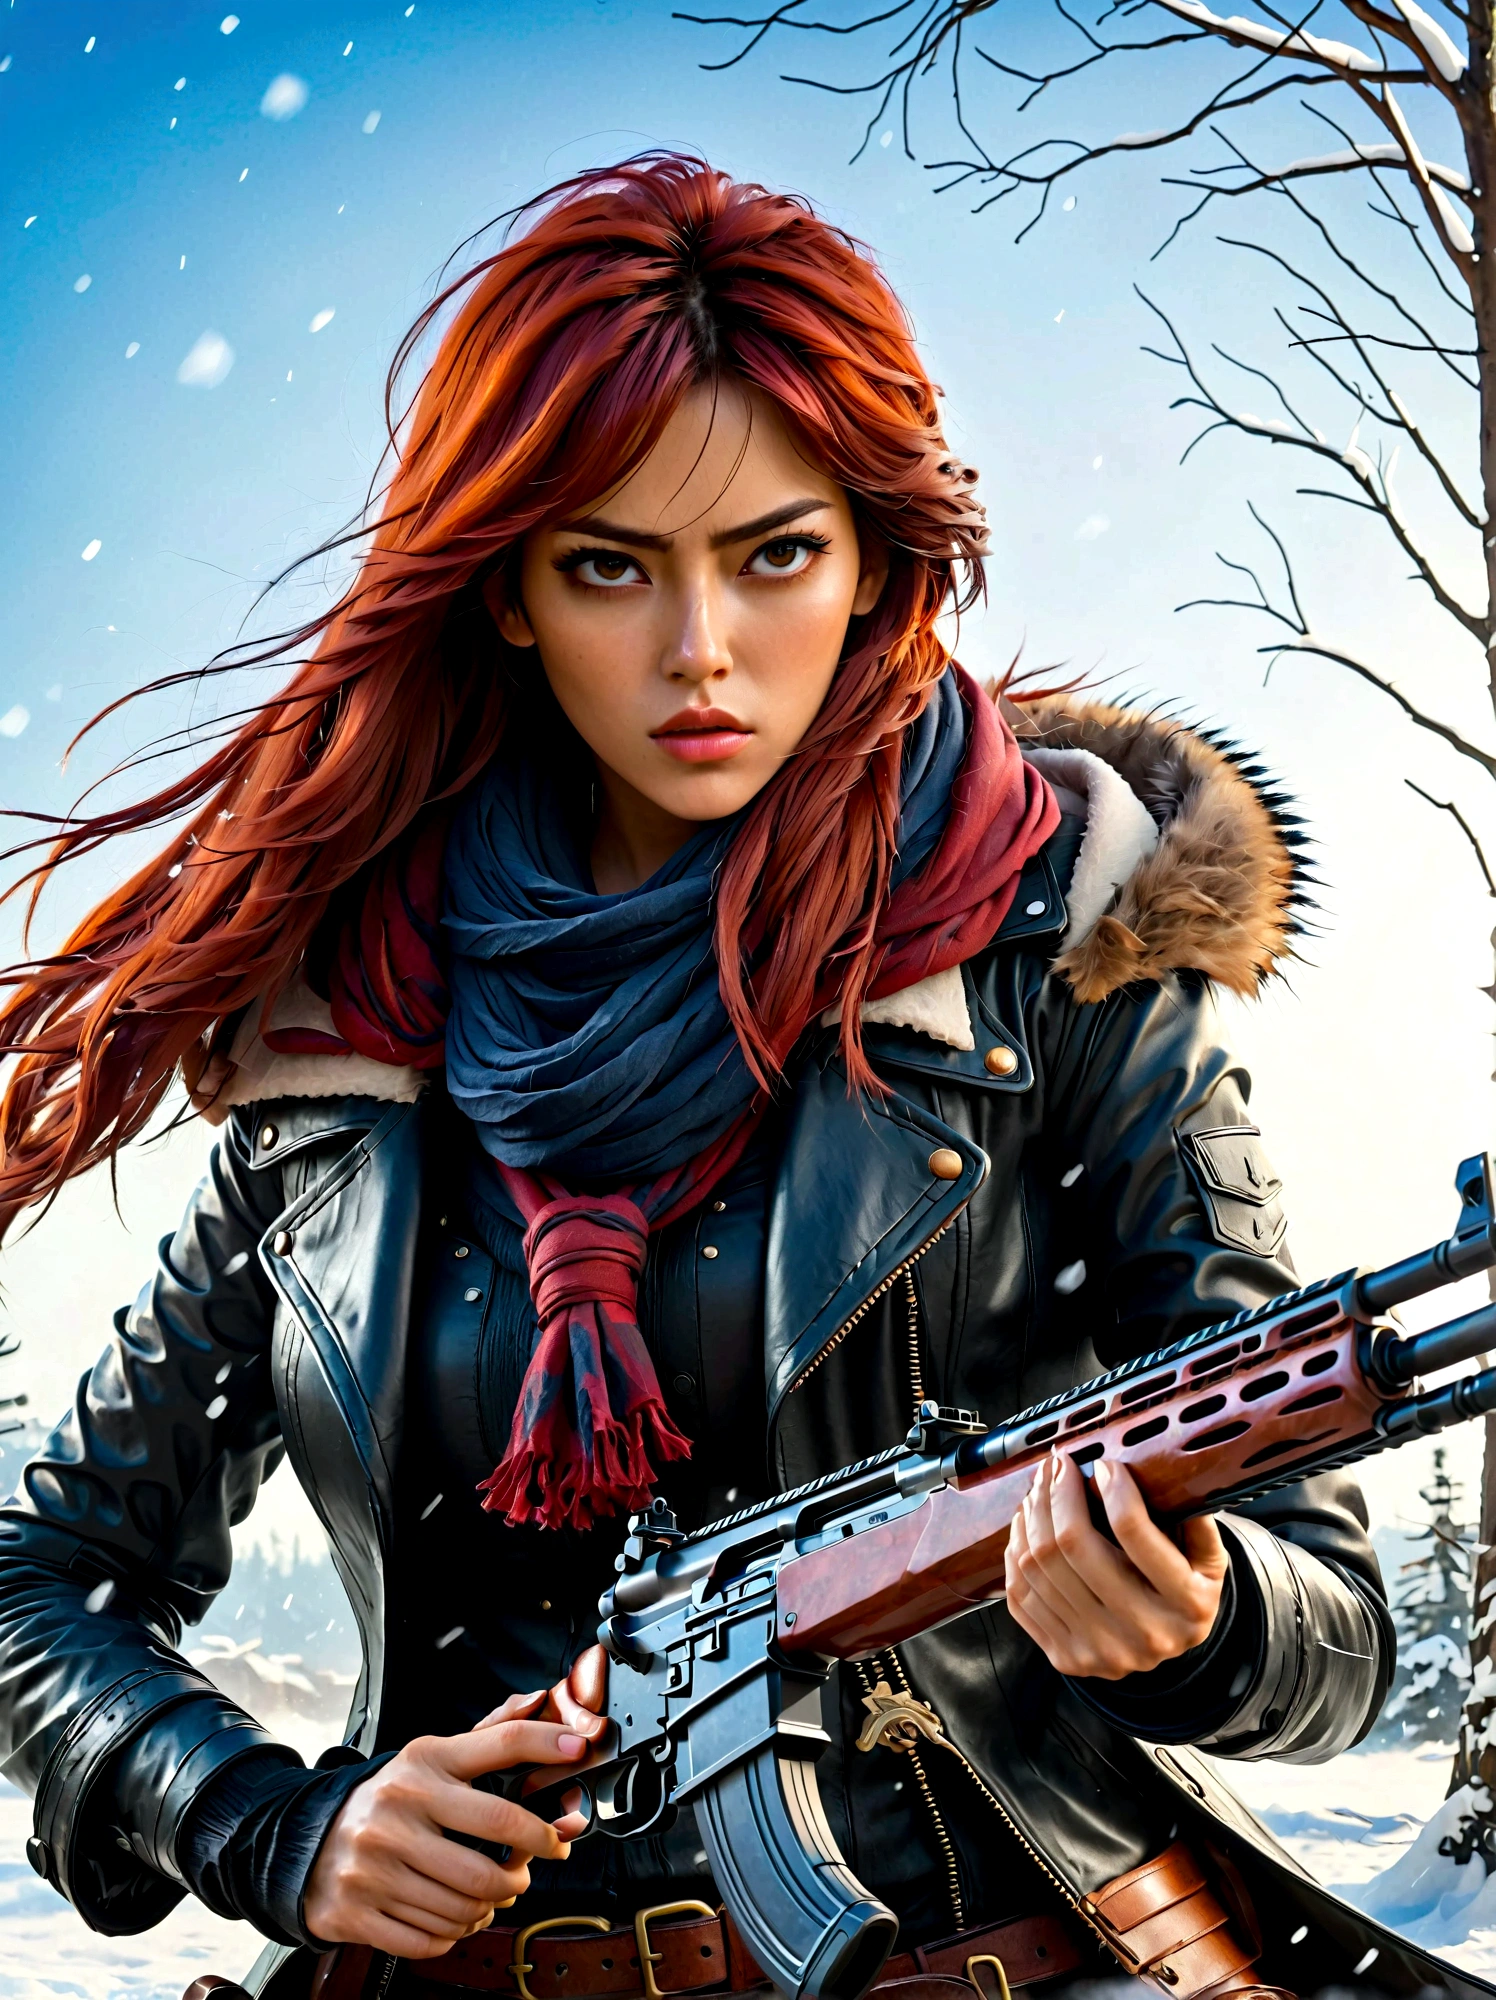 Girl holding a rifle, (Disgusted look:1.5), Snow Fighting Pose, East, Blade and Soul, Ink style, Long red hair, Leather and fur coats, cold, artwork, 3d, 4k, detailed, Practical